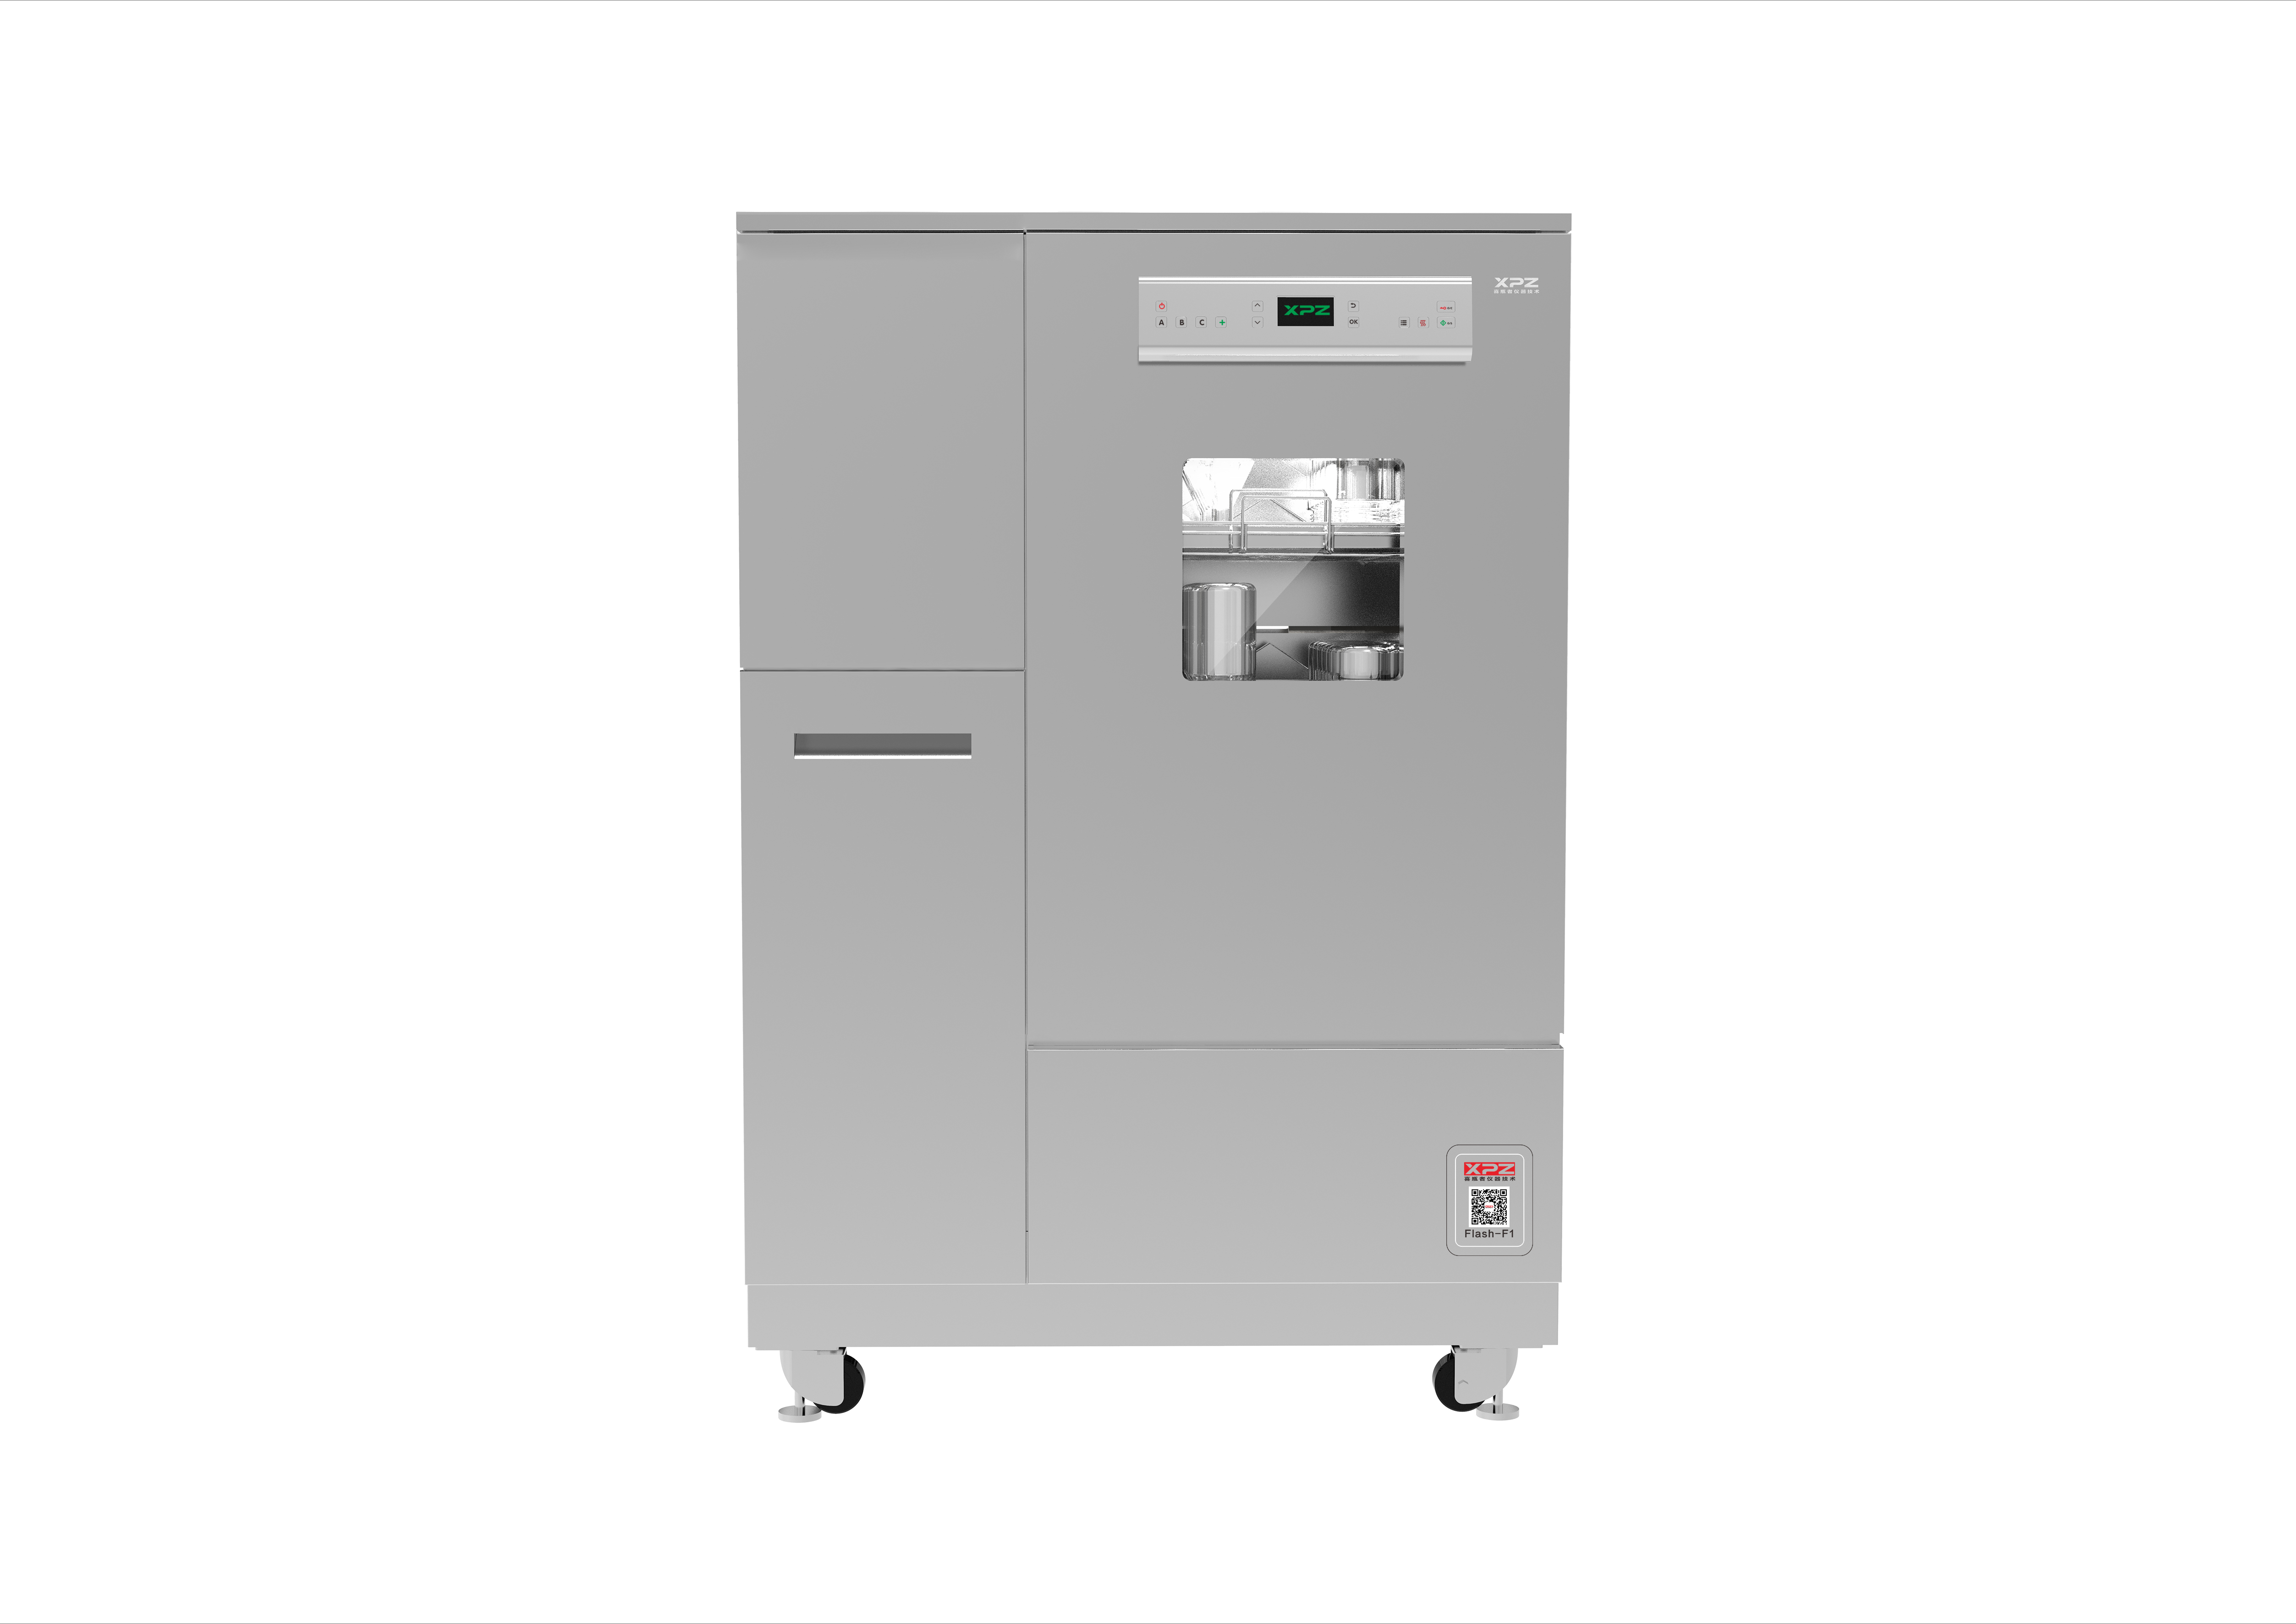 One of Hottest for VWR Laboratory Washer - The 308L self-contained laboratory glassware washer comes standard with a basket identification system and a large see-through window –  Xipingzhe